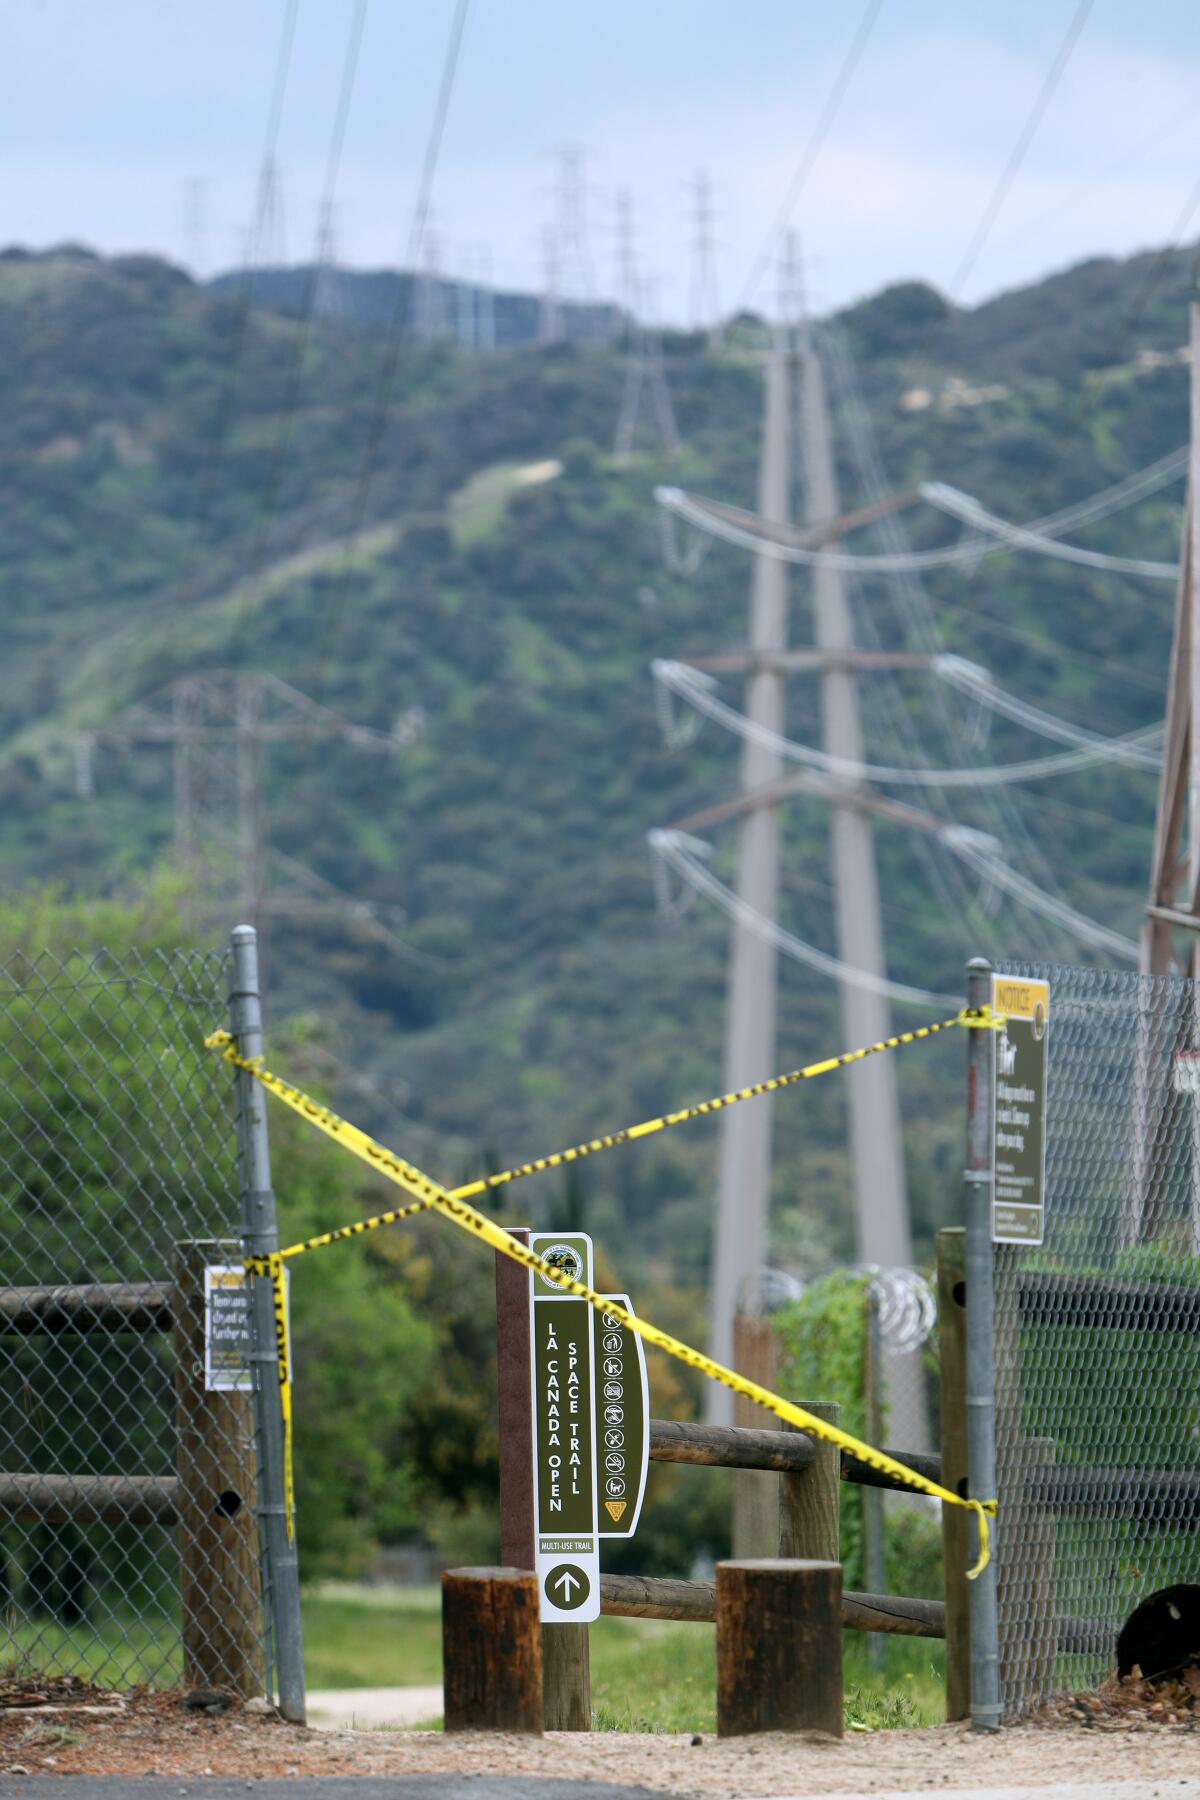 Caution tape wards off would-be hikers as La Cañada's trail system is shut down to help slow the spread of the novel coronavirus.